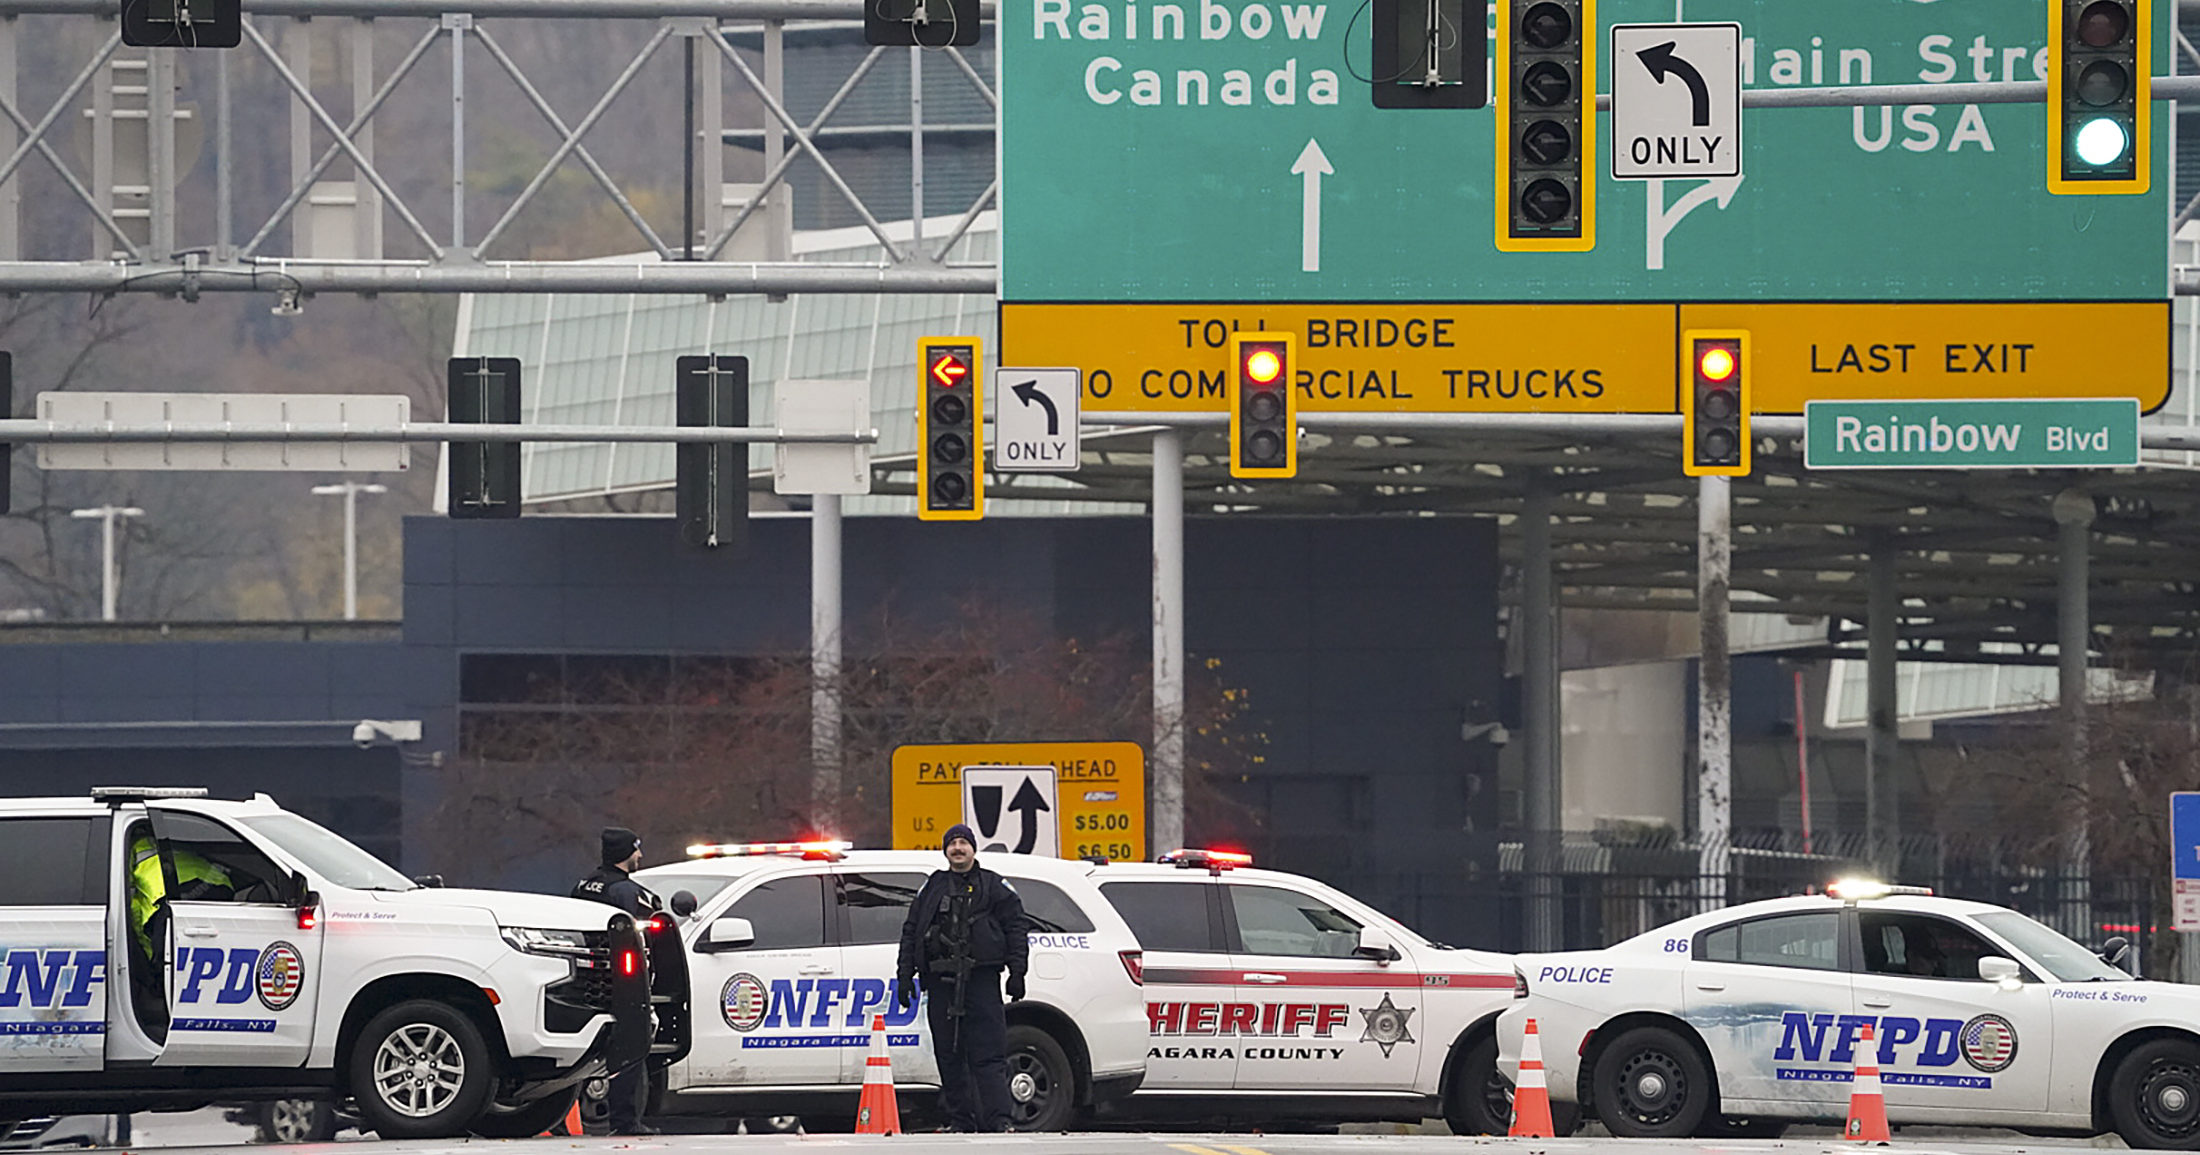 Law enforcement personnel block the entrance to the Rainbow Bridge on Wednesday in Niagara Falls, New York.